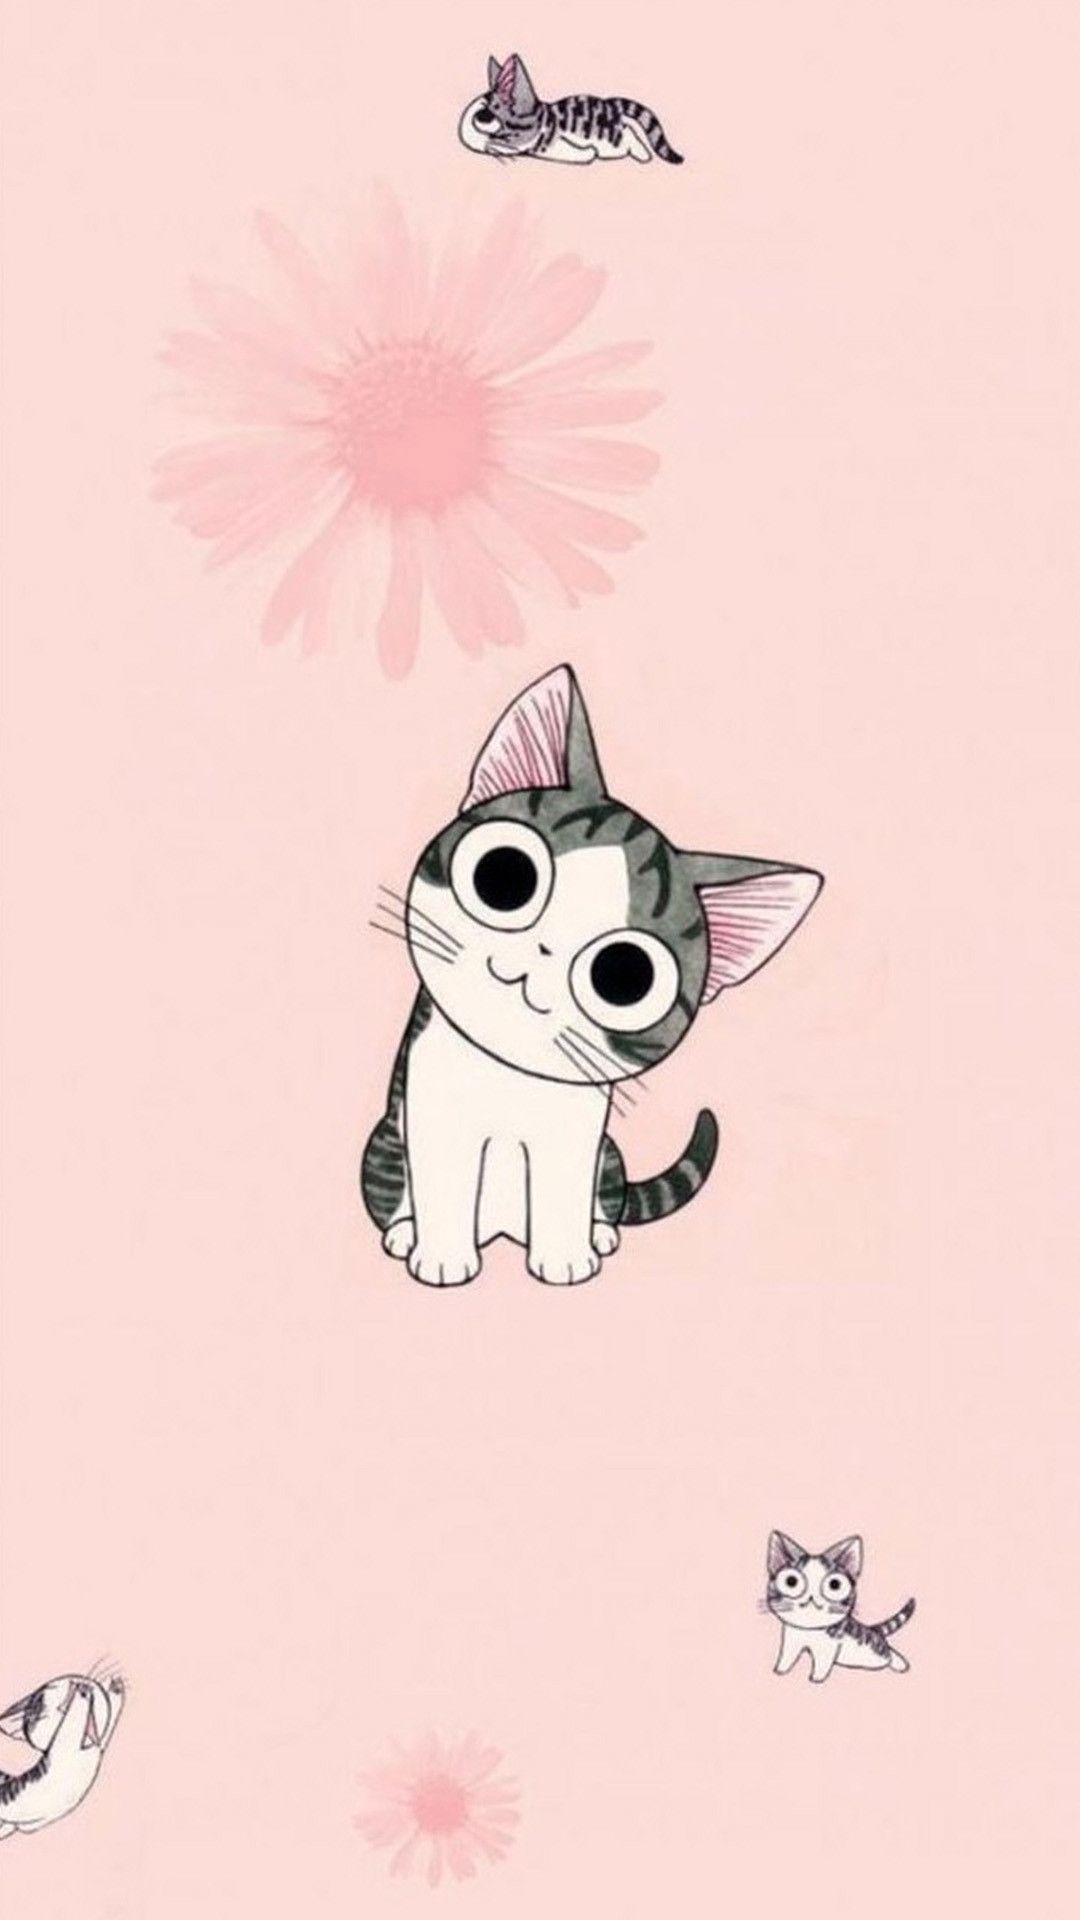 Aesthetic Cute Kitten Animation Wallpapers - Wallpaper Cave